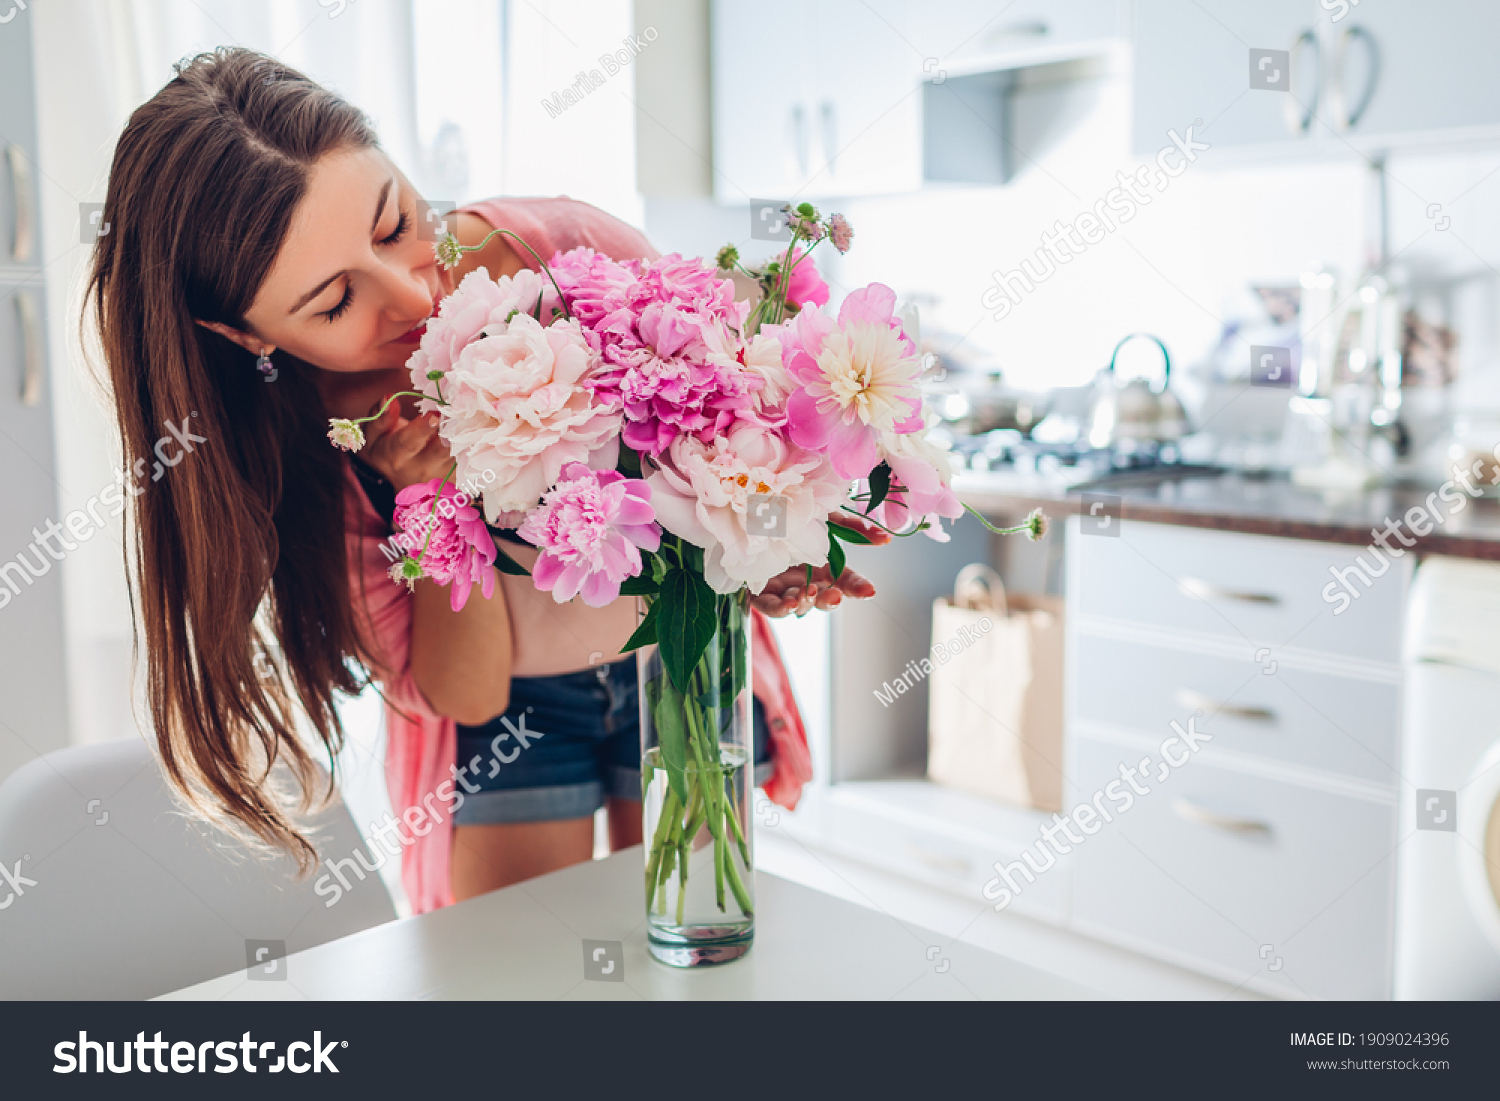 Valentine's day. Woman smelling bouquet of peonies at home. Housewife received present for holiday. Allergy free #1909024396